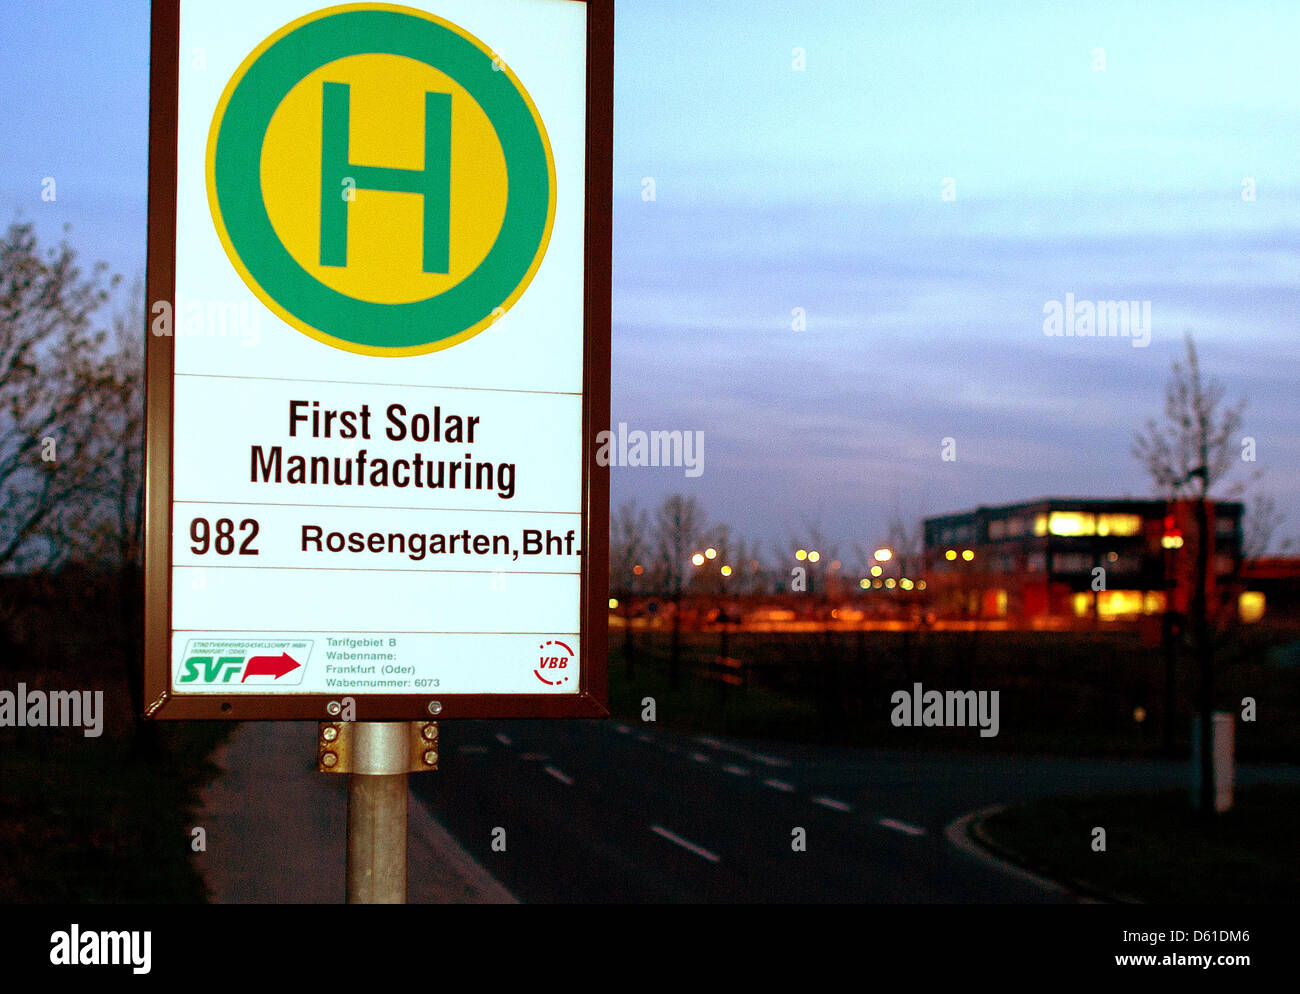 A bus stop sign at the plant of US company First Solar is pictured in Frankfurt Oder, Germany, 17 April 2012. First Solar announced on the same day that they were closing the plant which employed 1200 people. The plant will close at the end of October, shortly after a five-year job guarantee will have expired which the company agreed to in order to receive 45 million euros in subsi Stock Photo